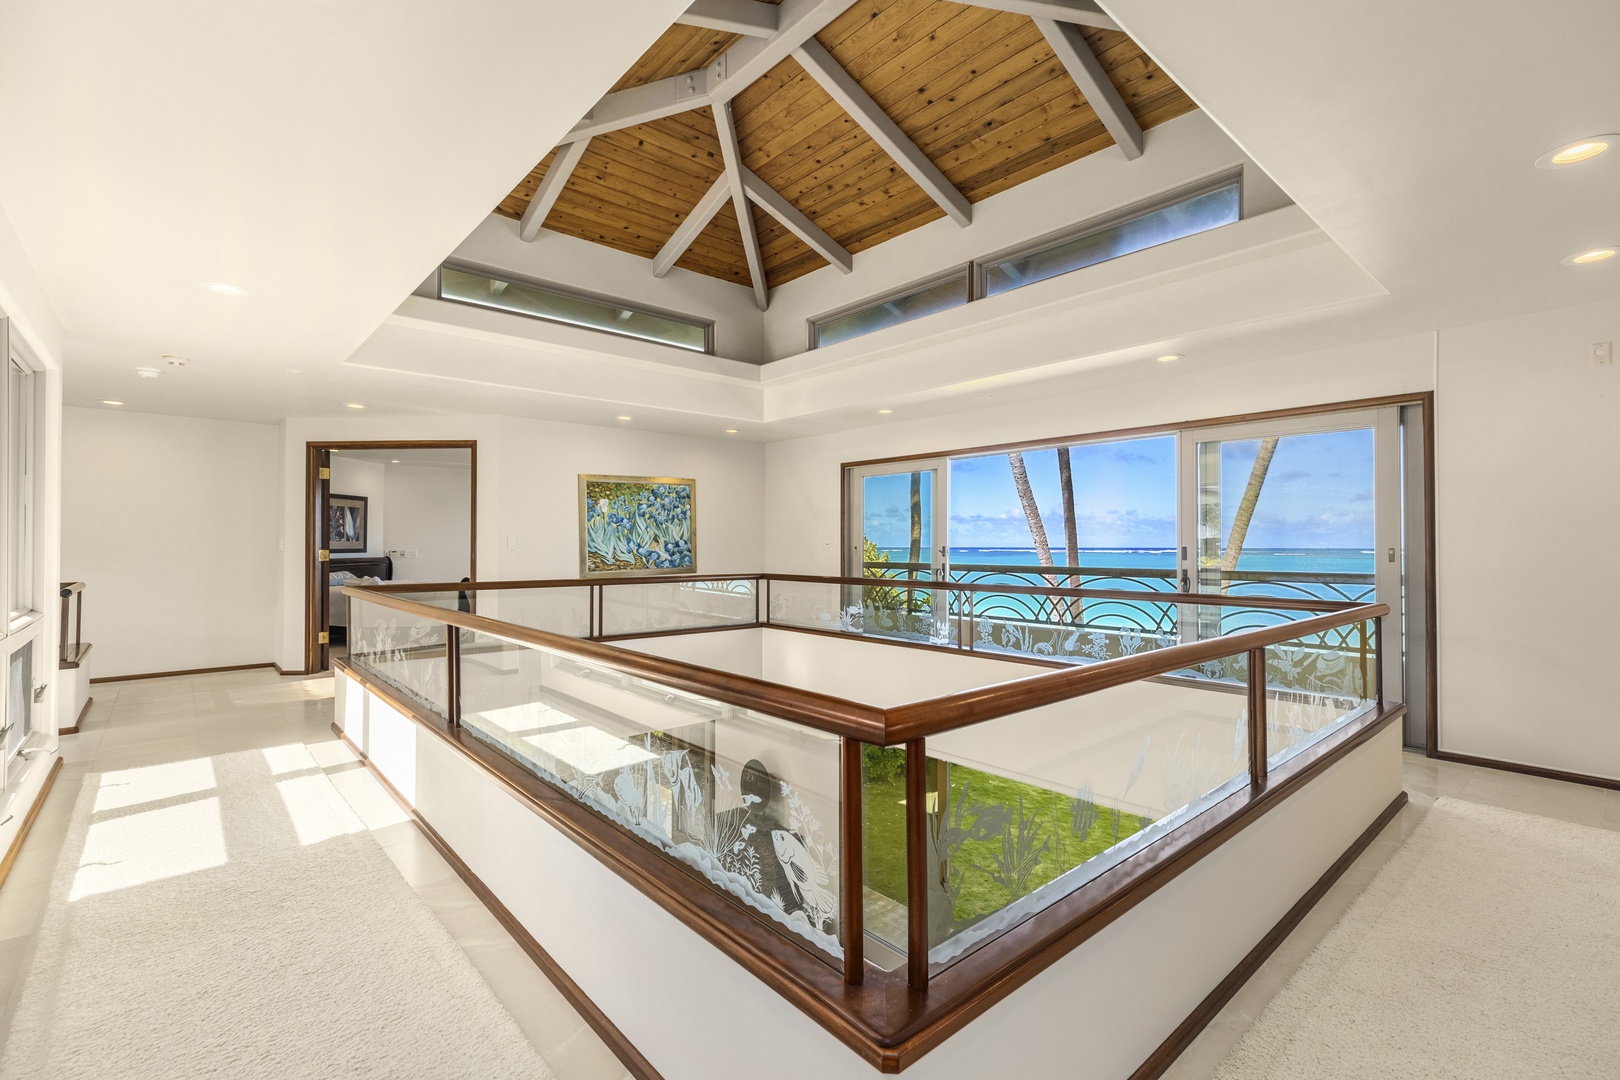 Kailua Vacation Rentals, Mokulua Sunrise - Overhead view of the main living area with sliding glass doors to the private backyard